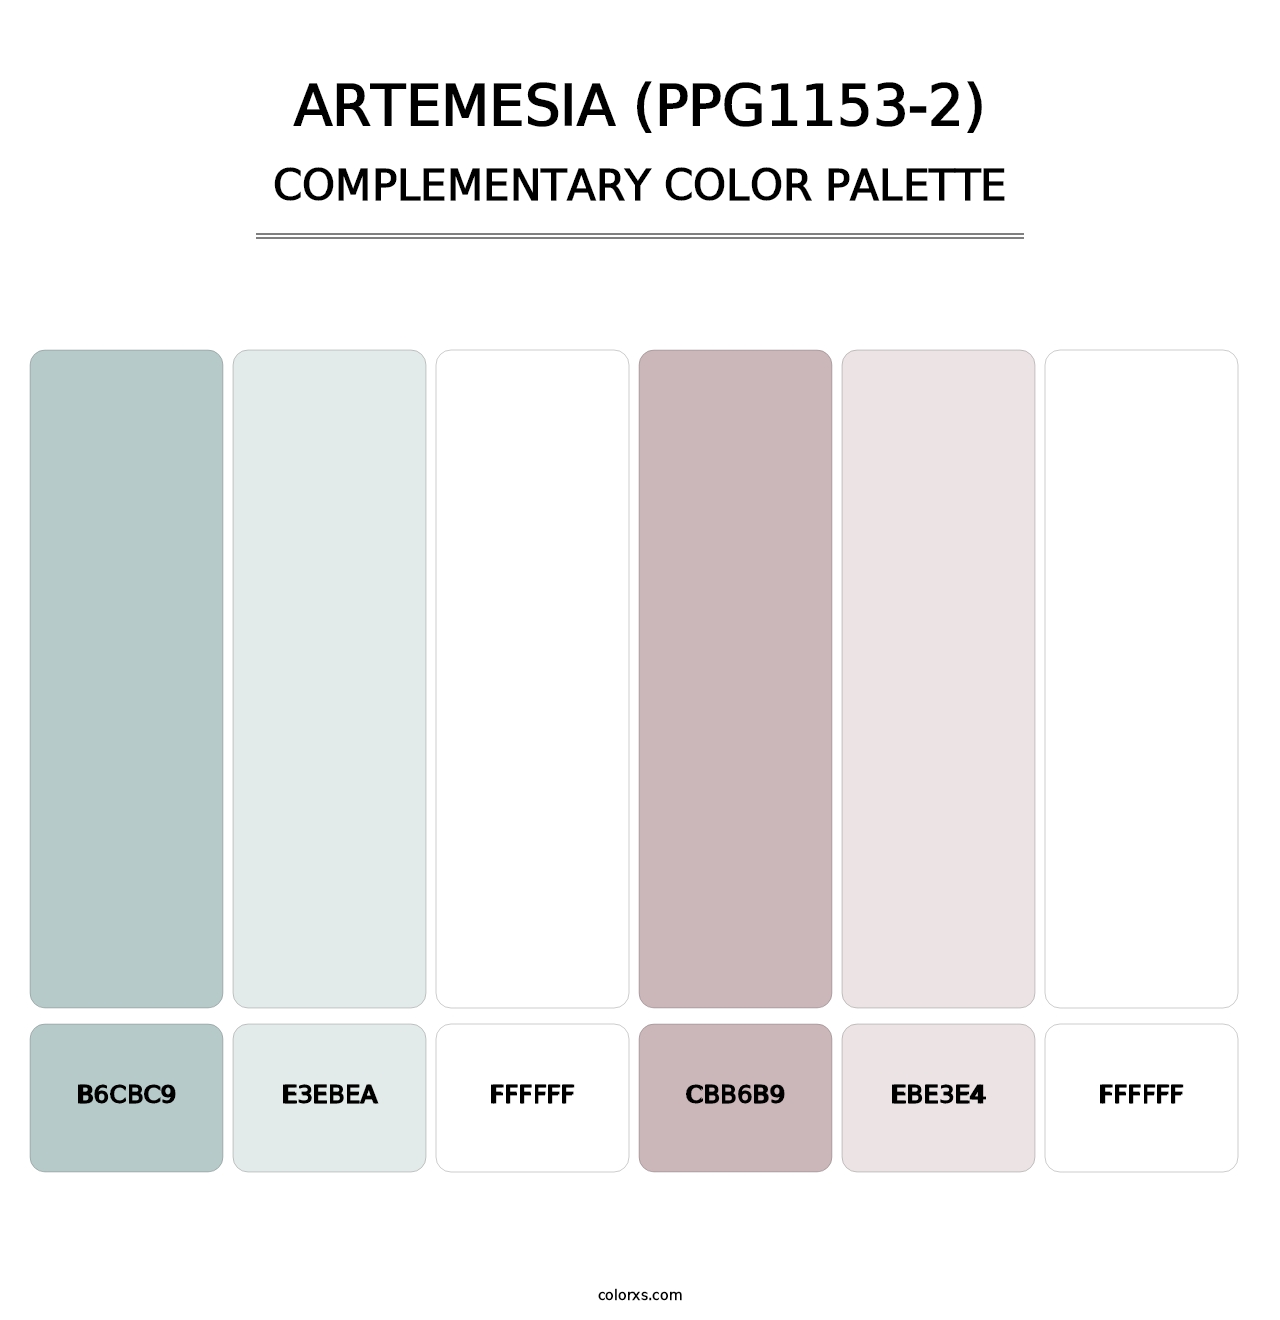 Artemesia (PPG1153-2) - Complementary Color Palette